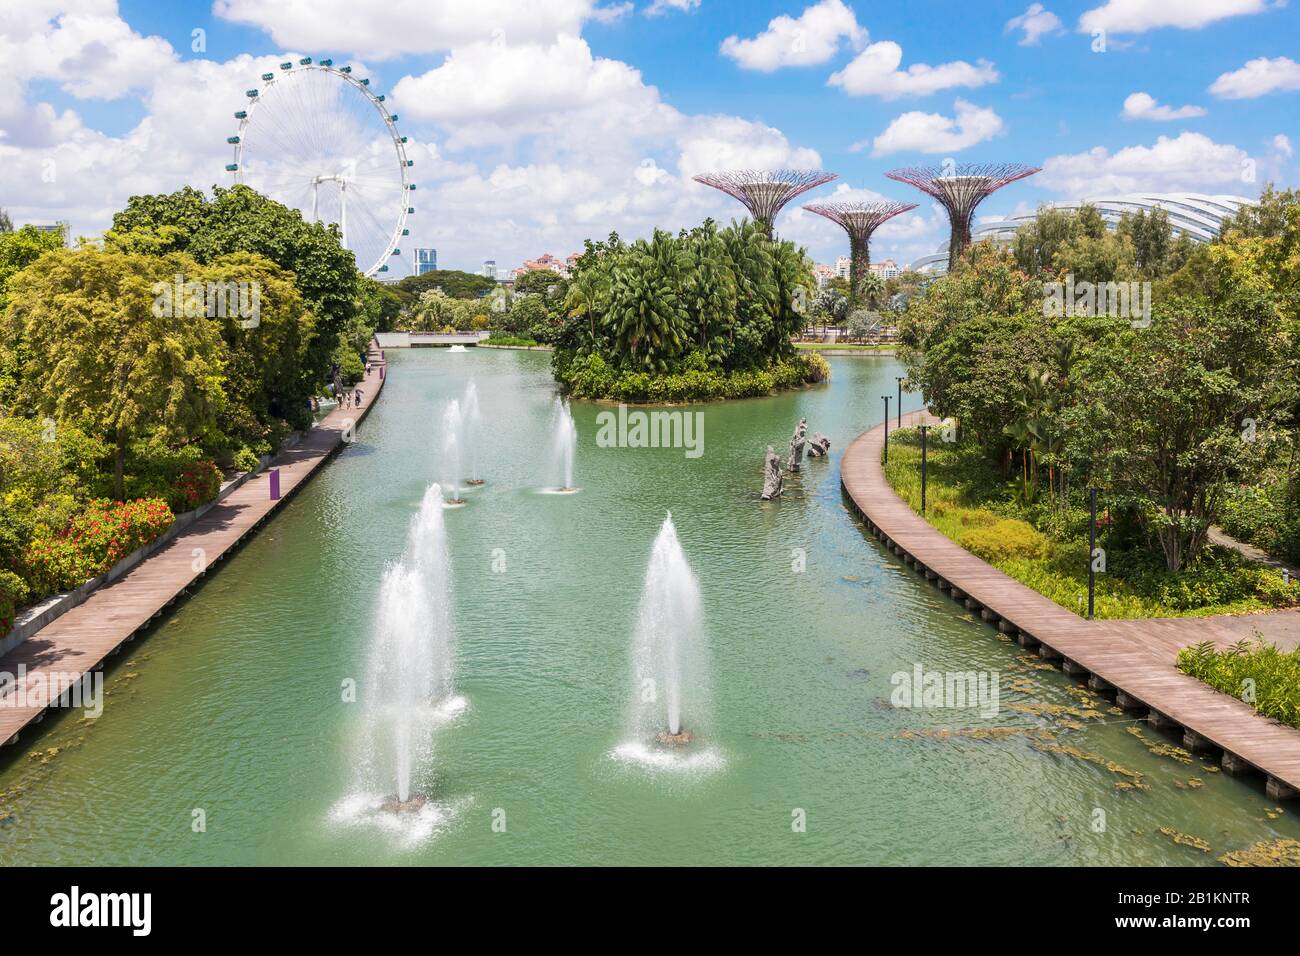 Water fountains in the public park, Gardens on the Bay with the Singapore Flyer and skyscrapers on the skyline, Singapore, Asia Stock Photo